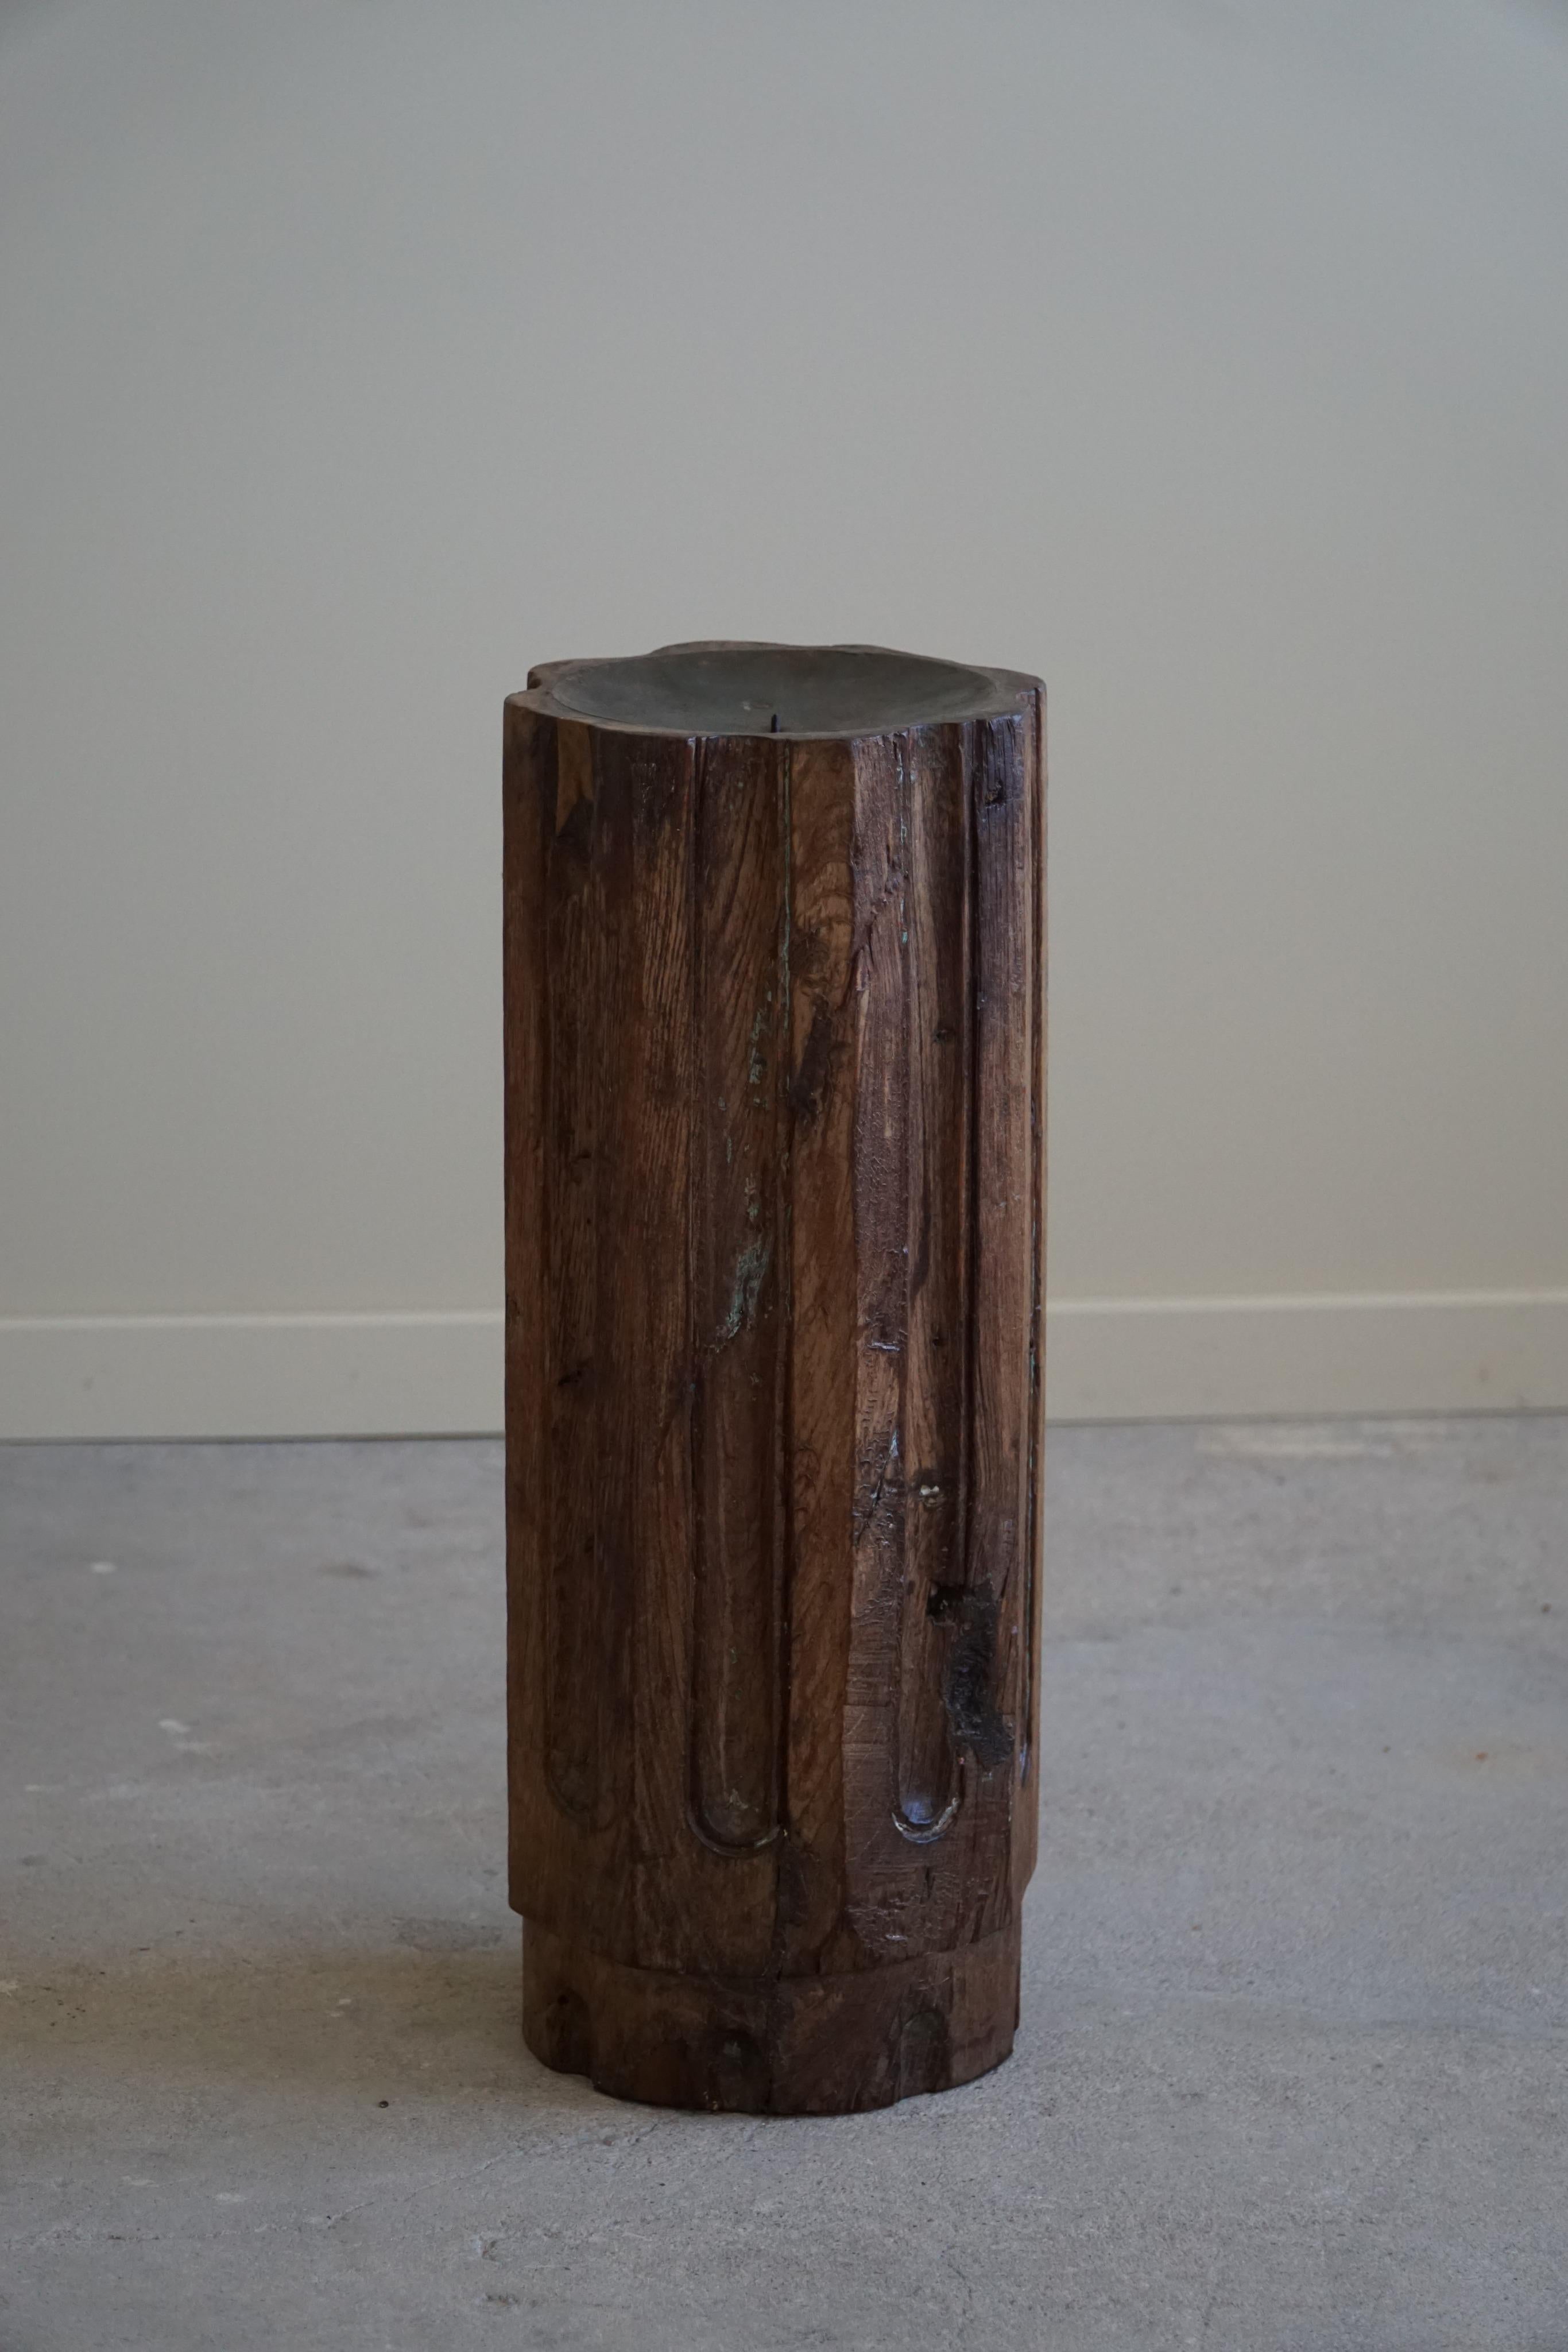 Brutalist Solid Wooden Handcrafted Torchére, Floor Candle Holder from the 1920s